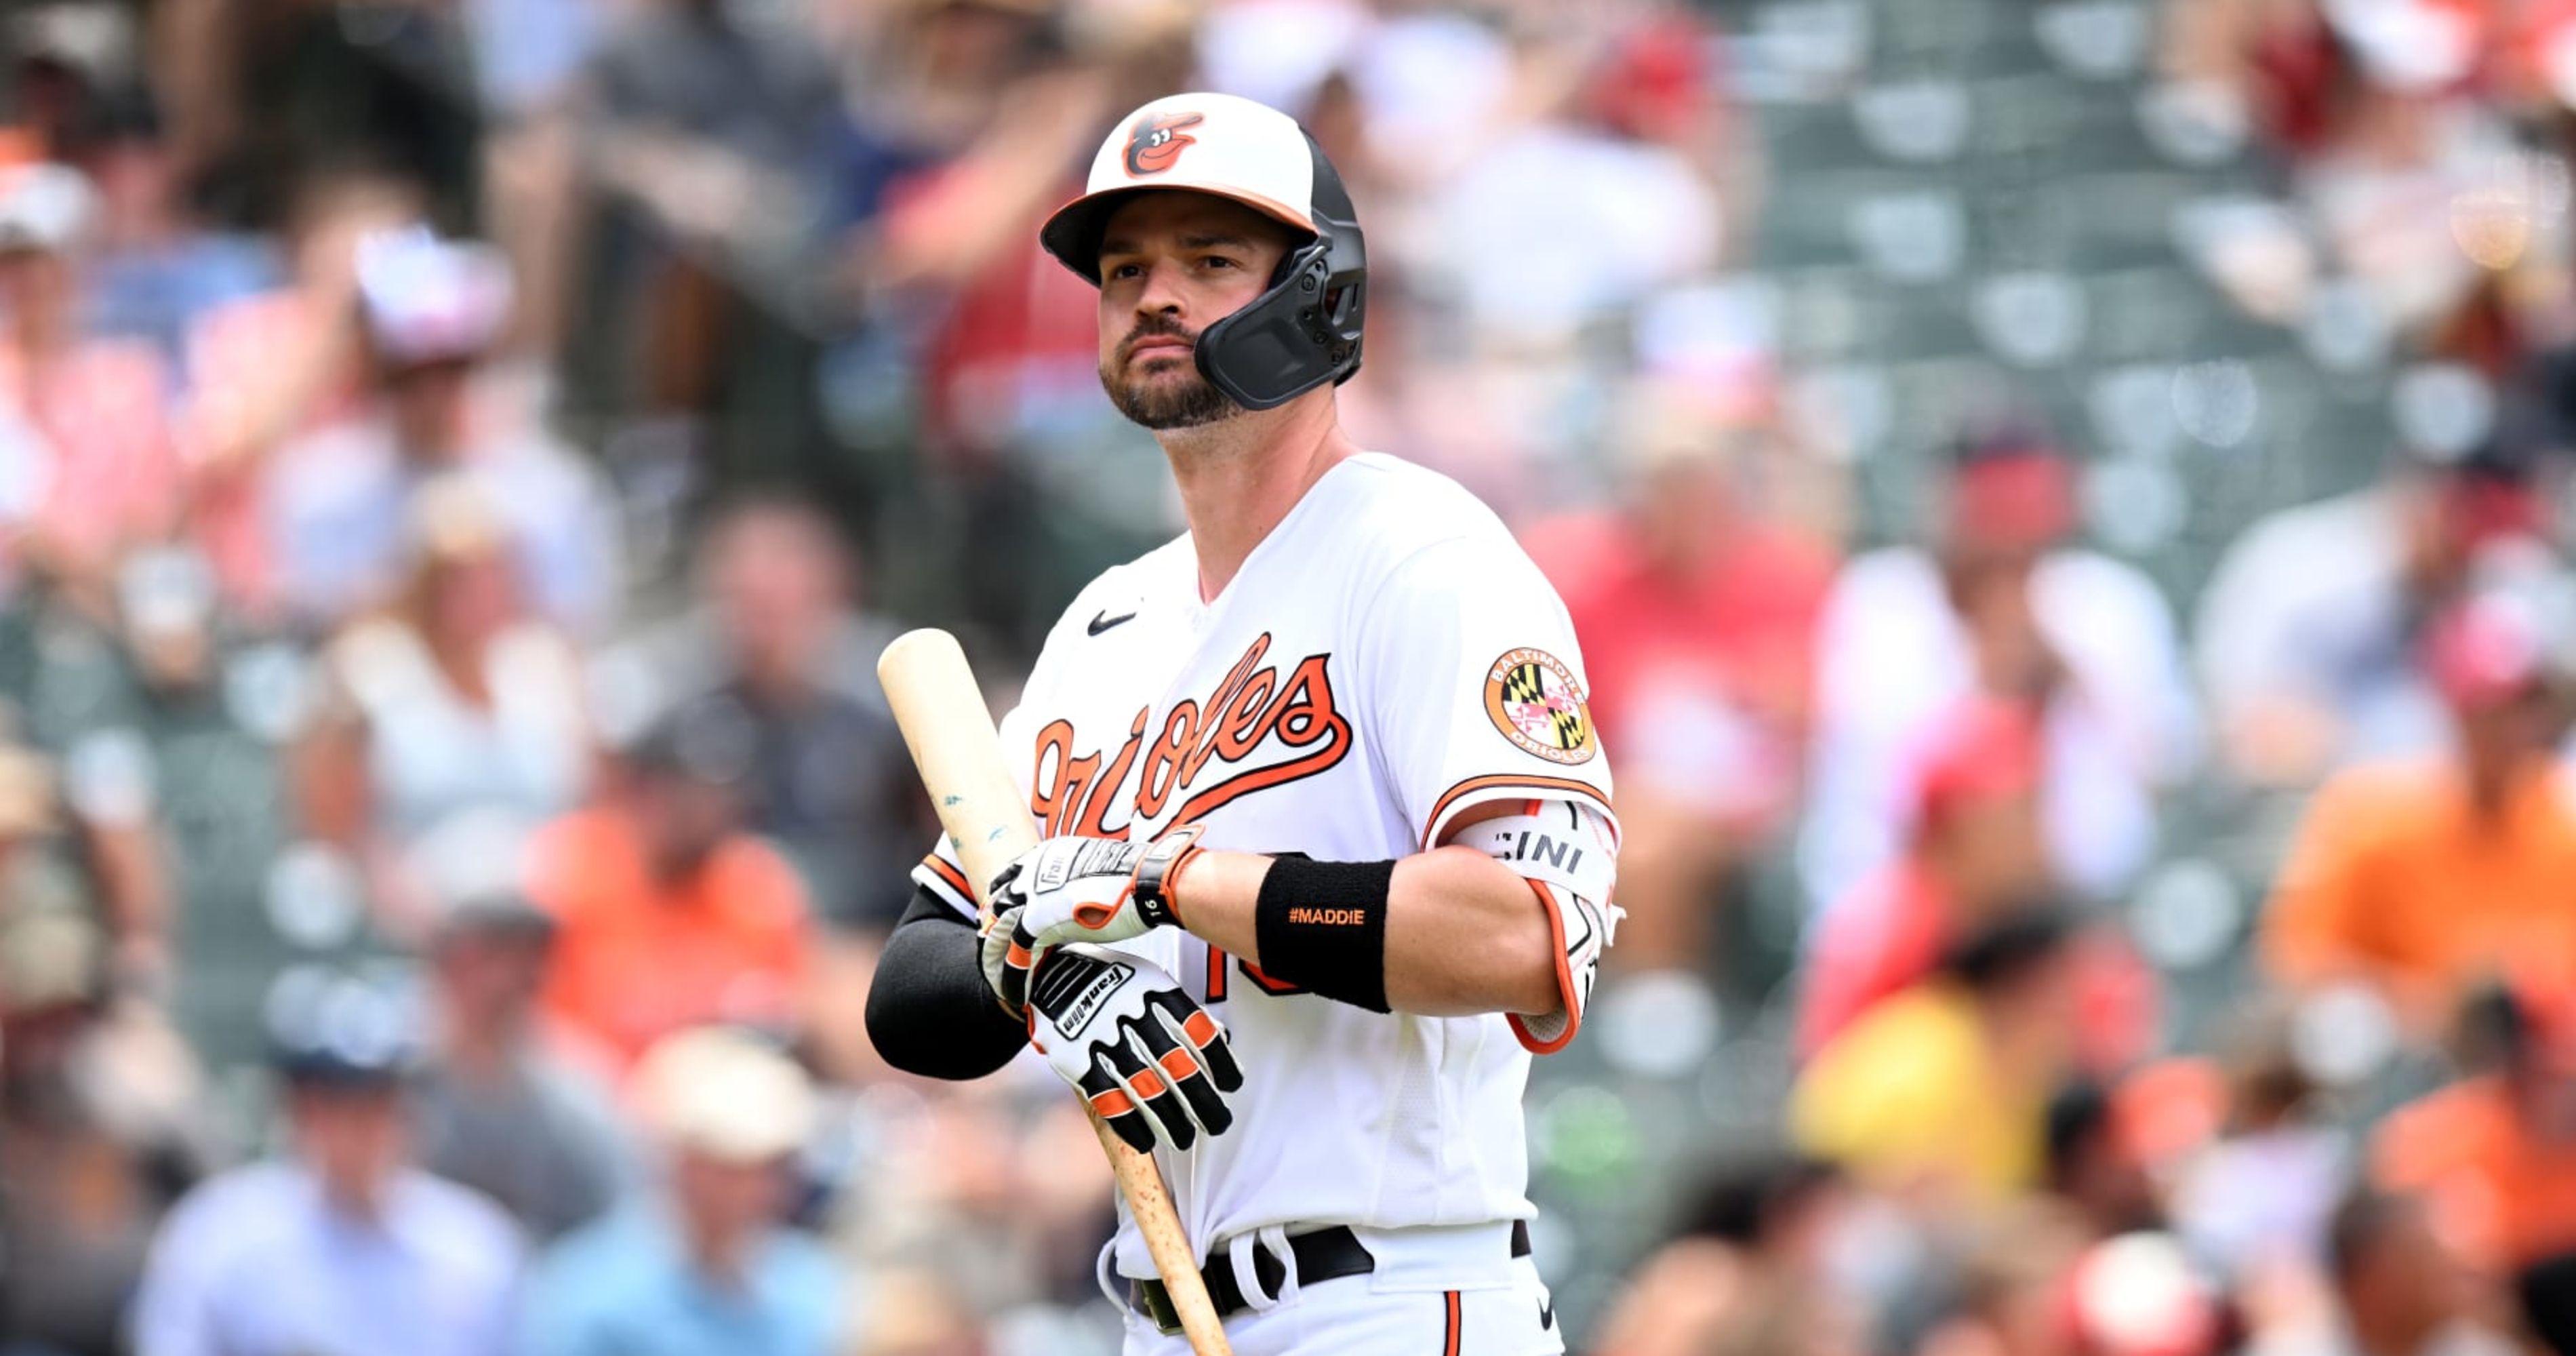 Trey Mancini On A Tear For Orioles With All-Star Game, Trade Deadline  Looming - PressBox